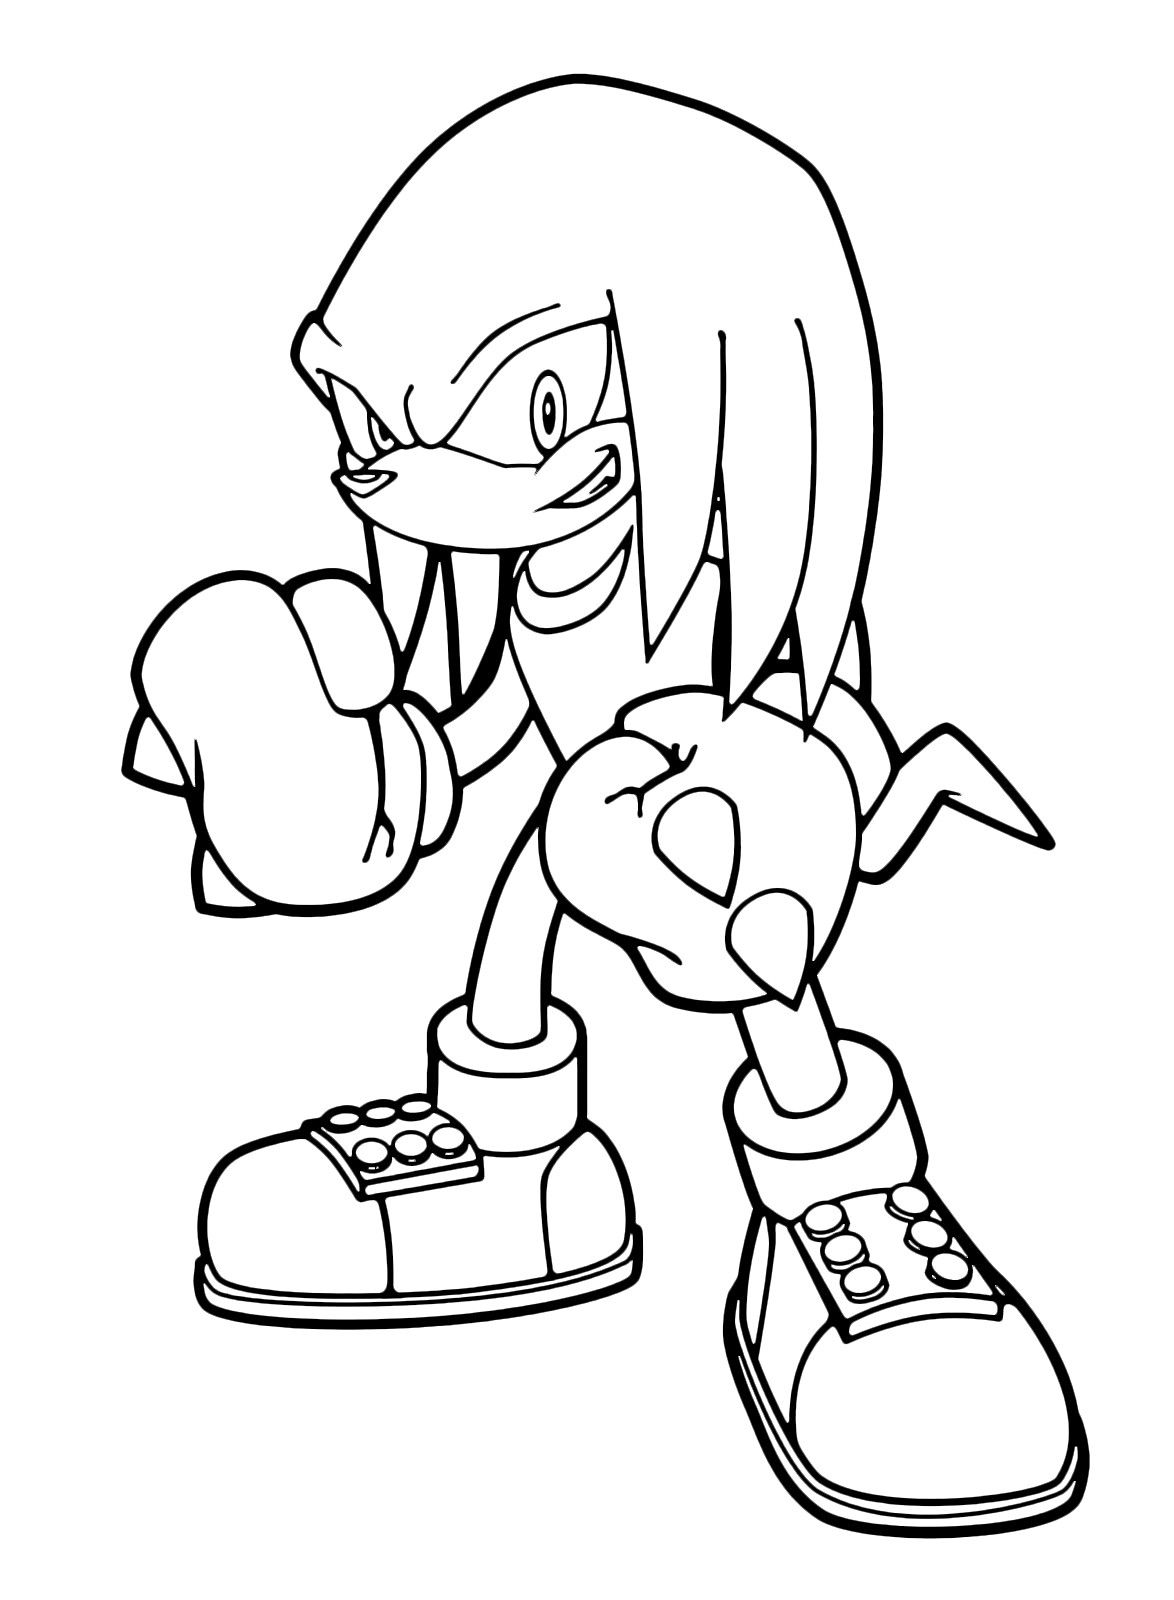 Knuckles | Printable coloring pages - SheetalColor.com